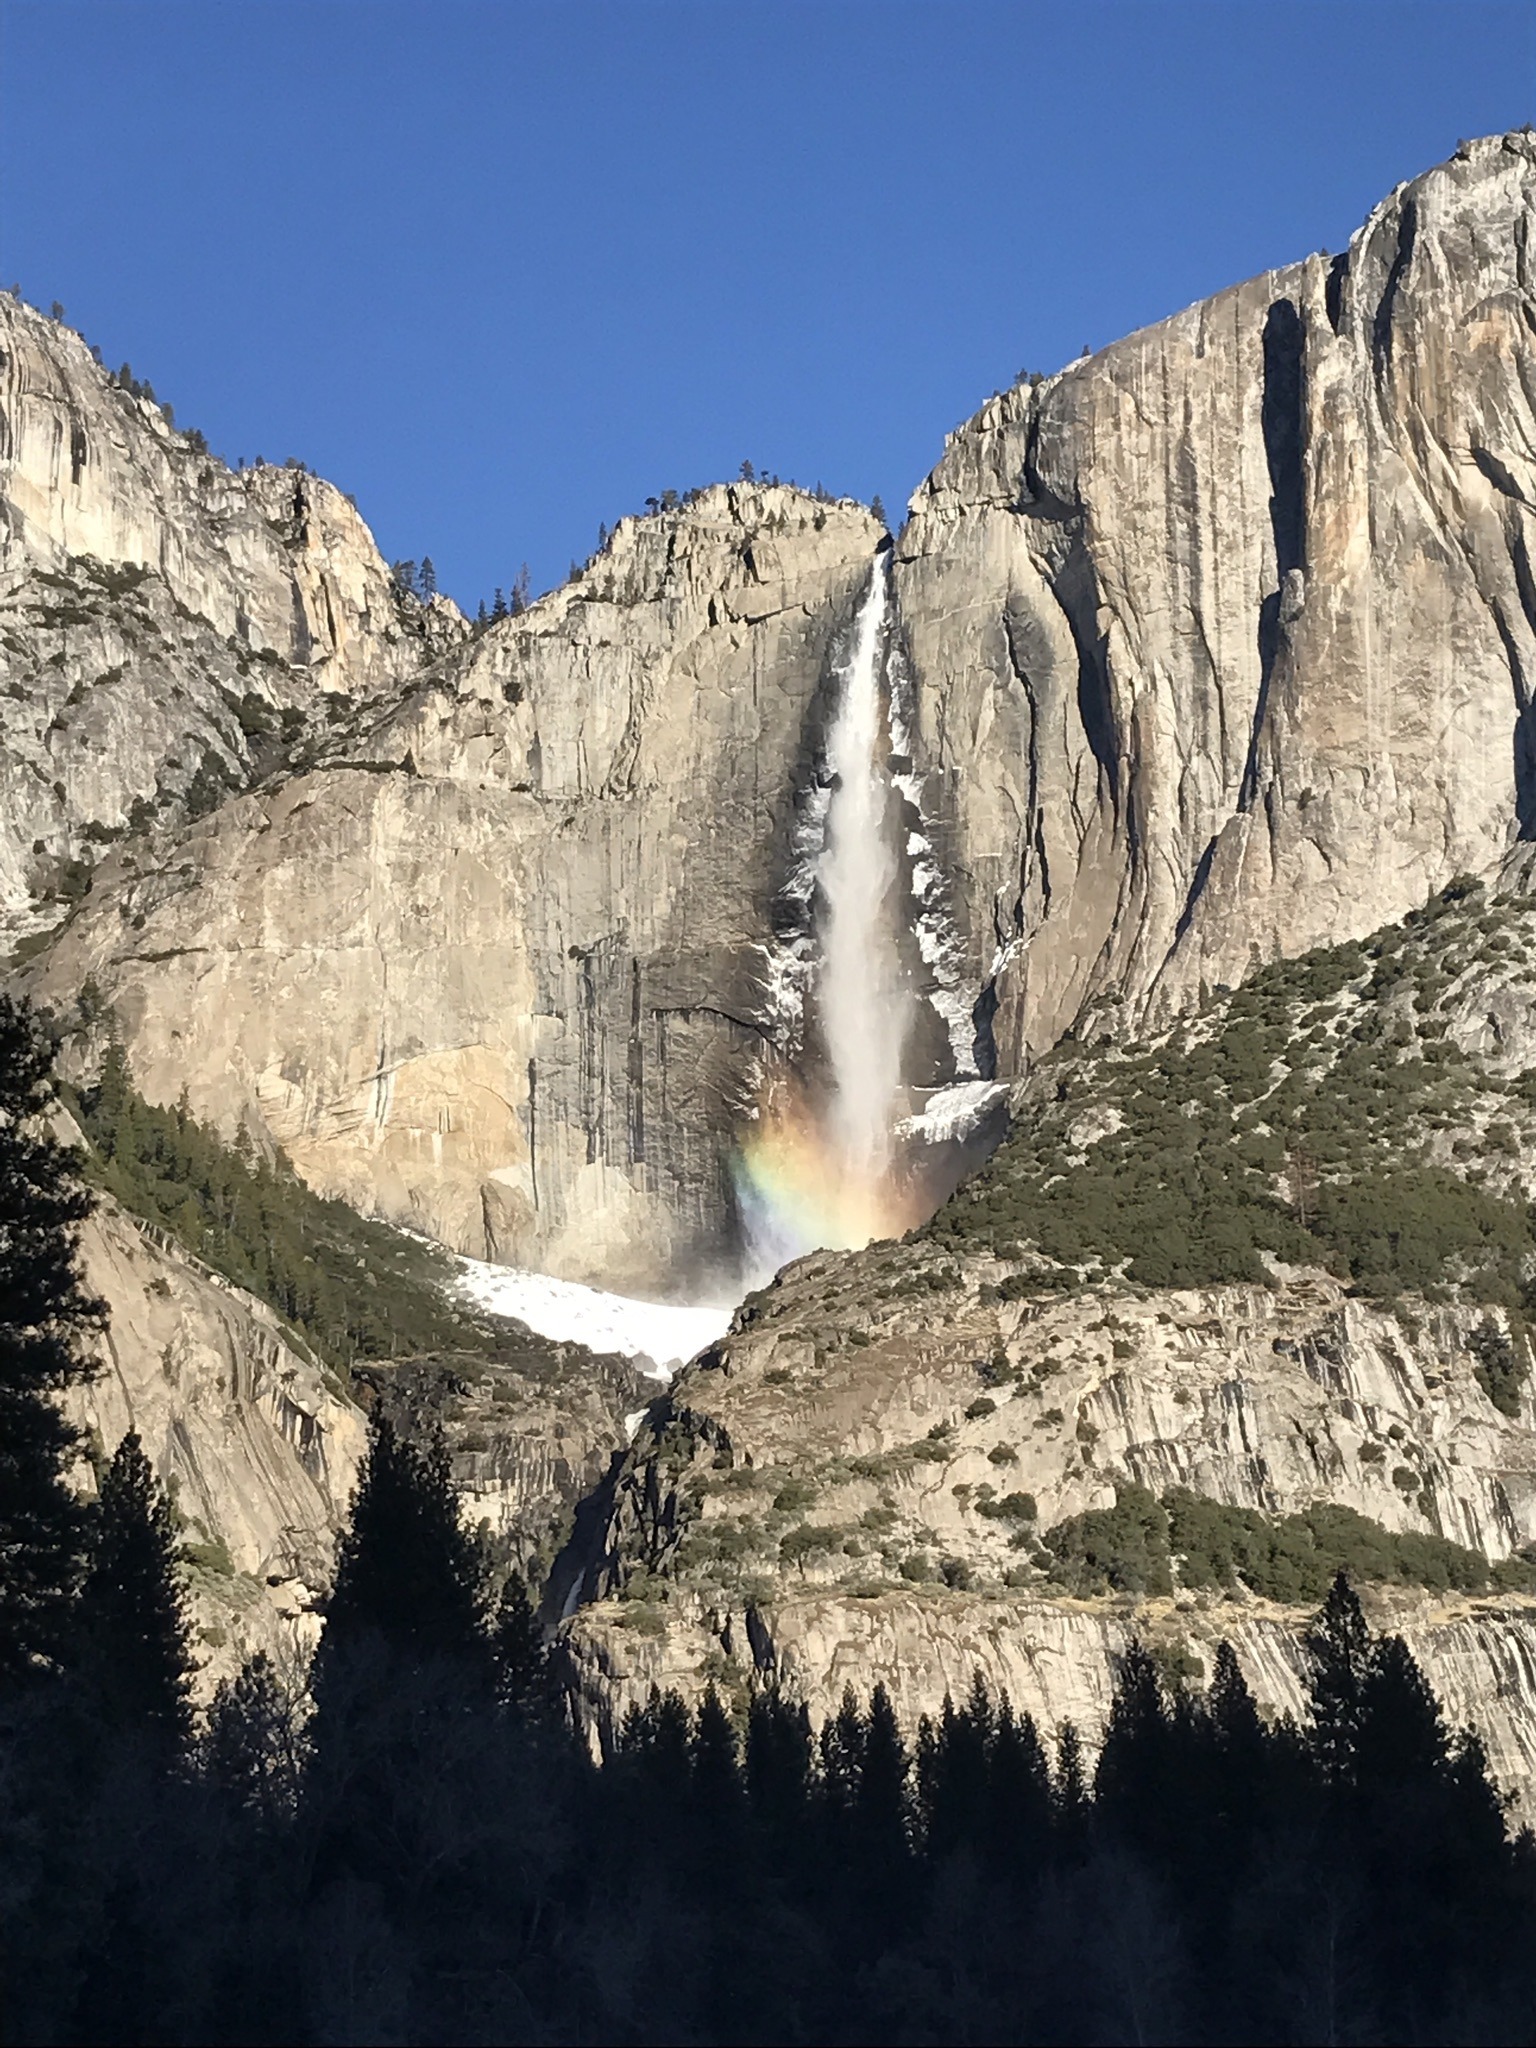 A beauty shot of Yosemite Falls, with a rainbow visible in the mist and snow piled up at the base of the upper fall. Photo: Melissa King.